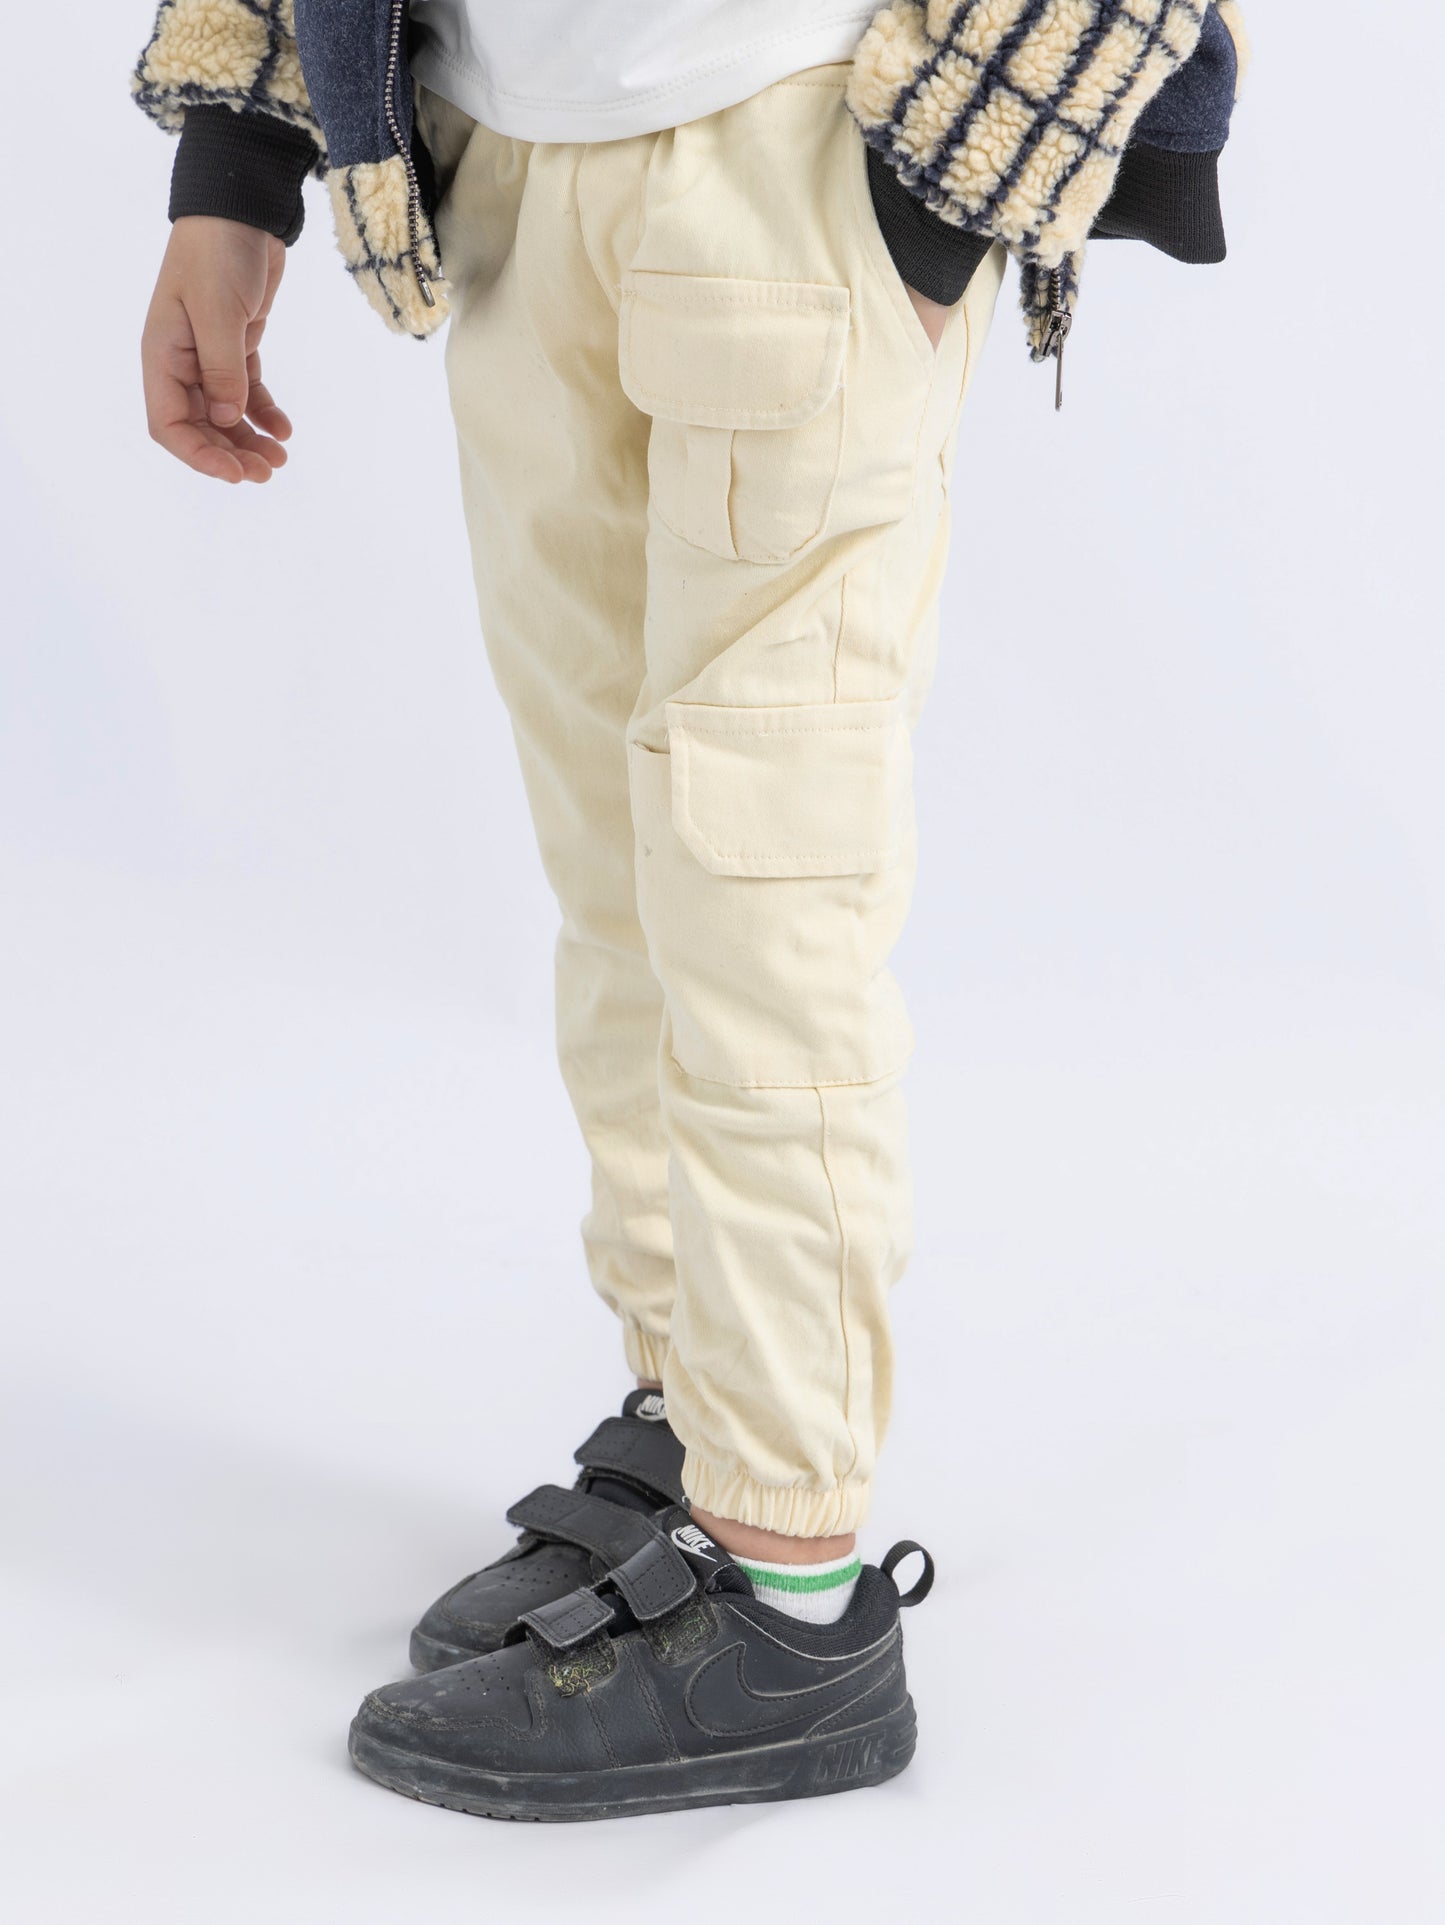 Beige Cargo Pants with Pockets